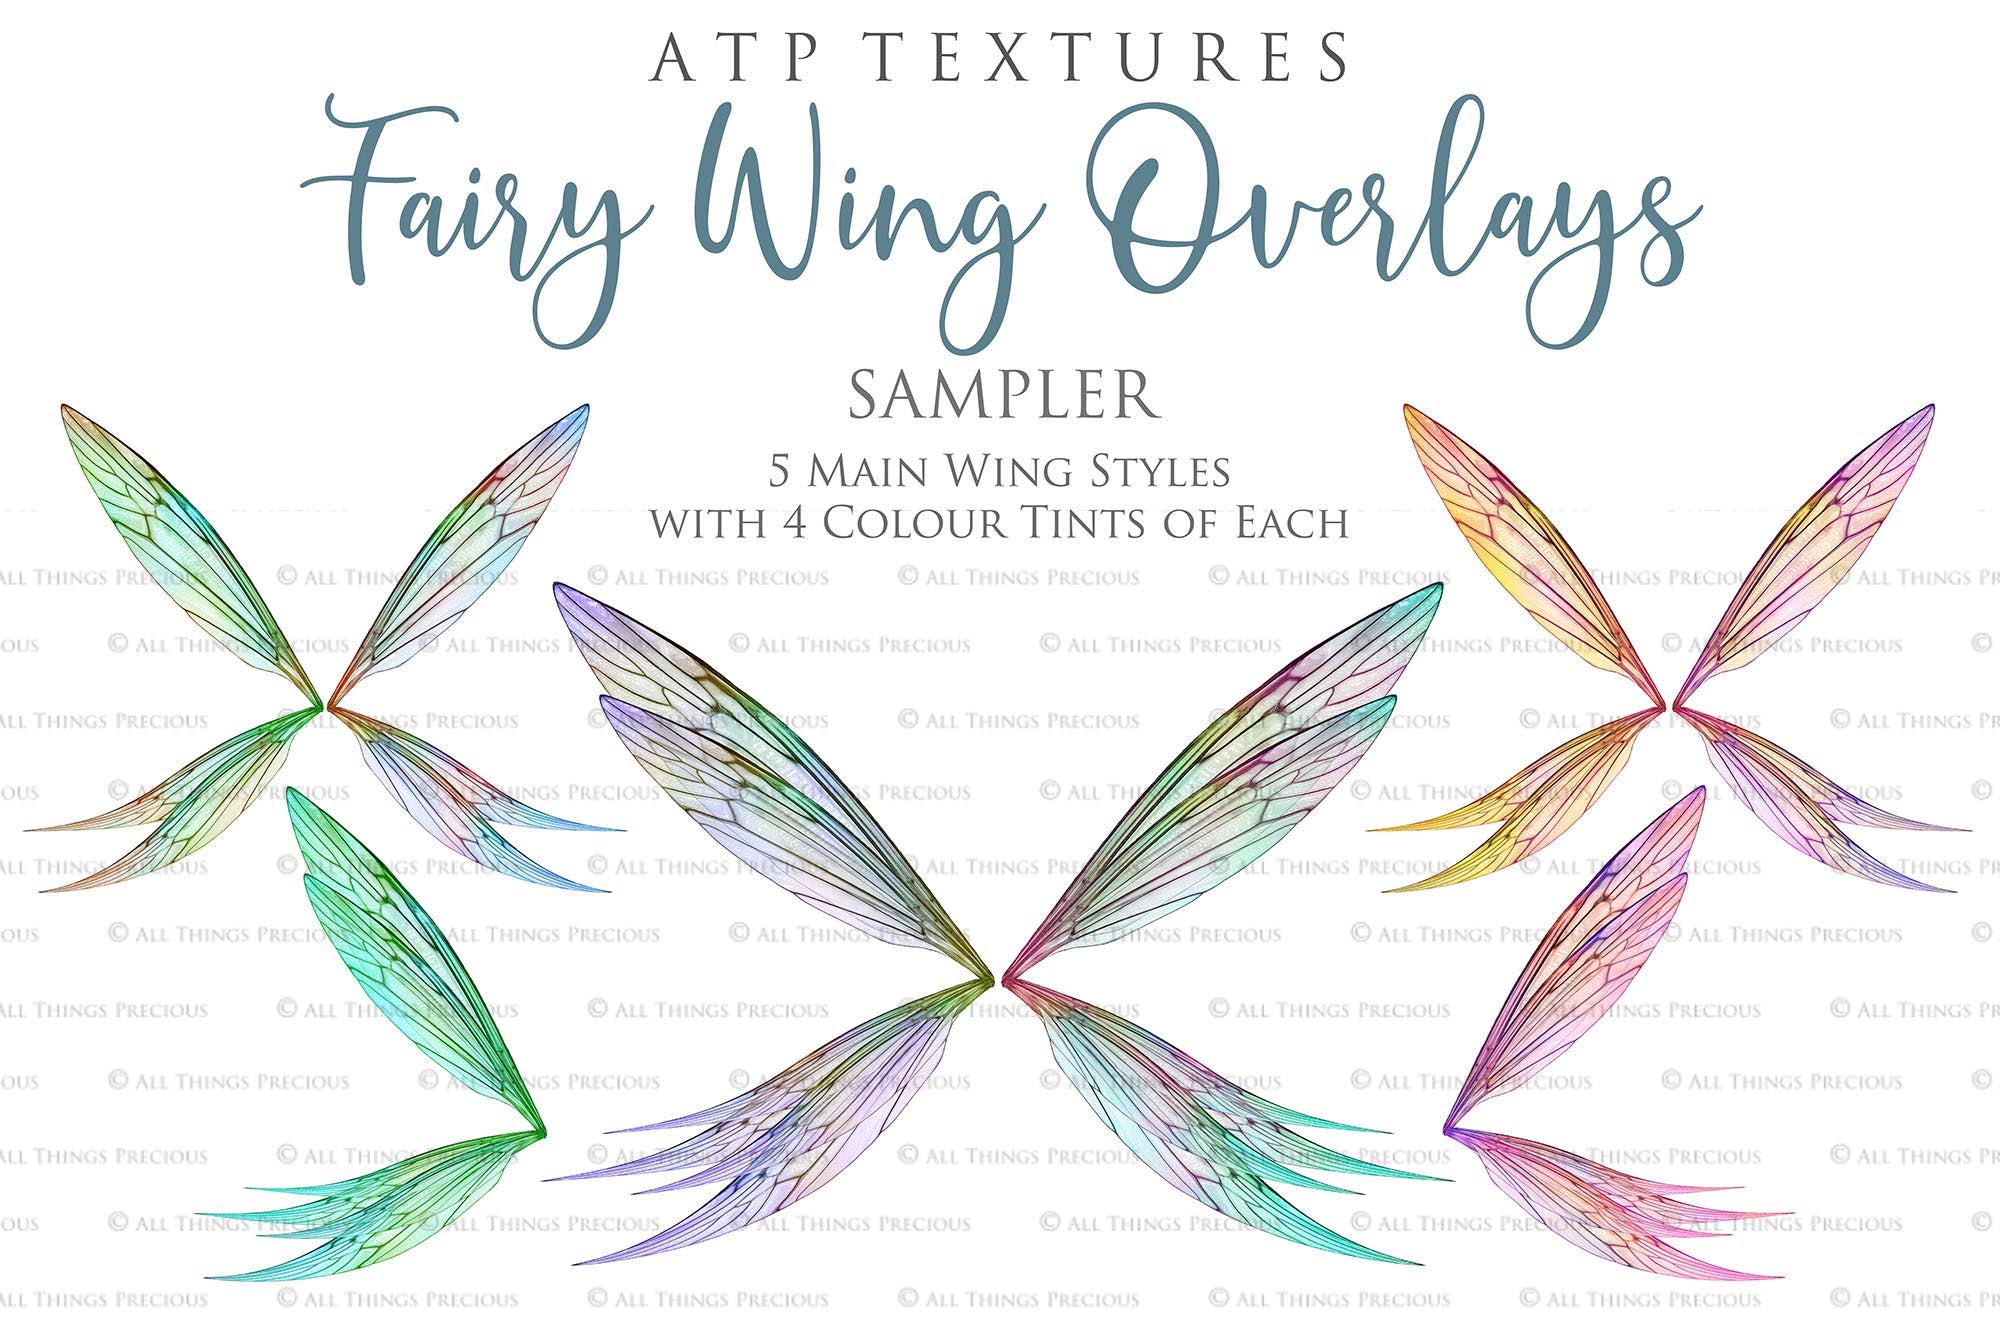 Digital Fairy Wings Overlays clipart. Png transparent see through files for photoshop. Butterfly Angel, Color, Print Photography editing. High resolution, 300dpi. Printable, Photography Graphic design assets, add on stock resources. Magical Scrapbooking design. Faery Photographer edit. Colorful Big Bundle. ATP Textures